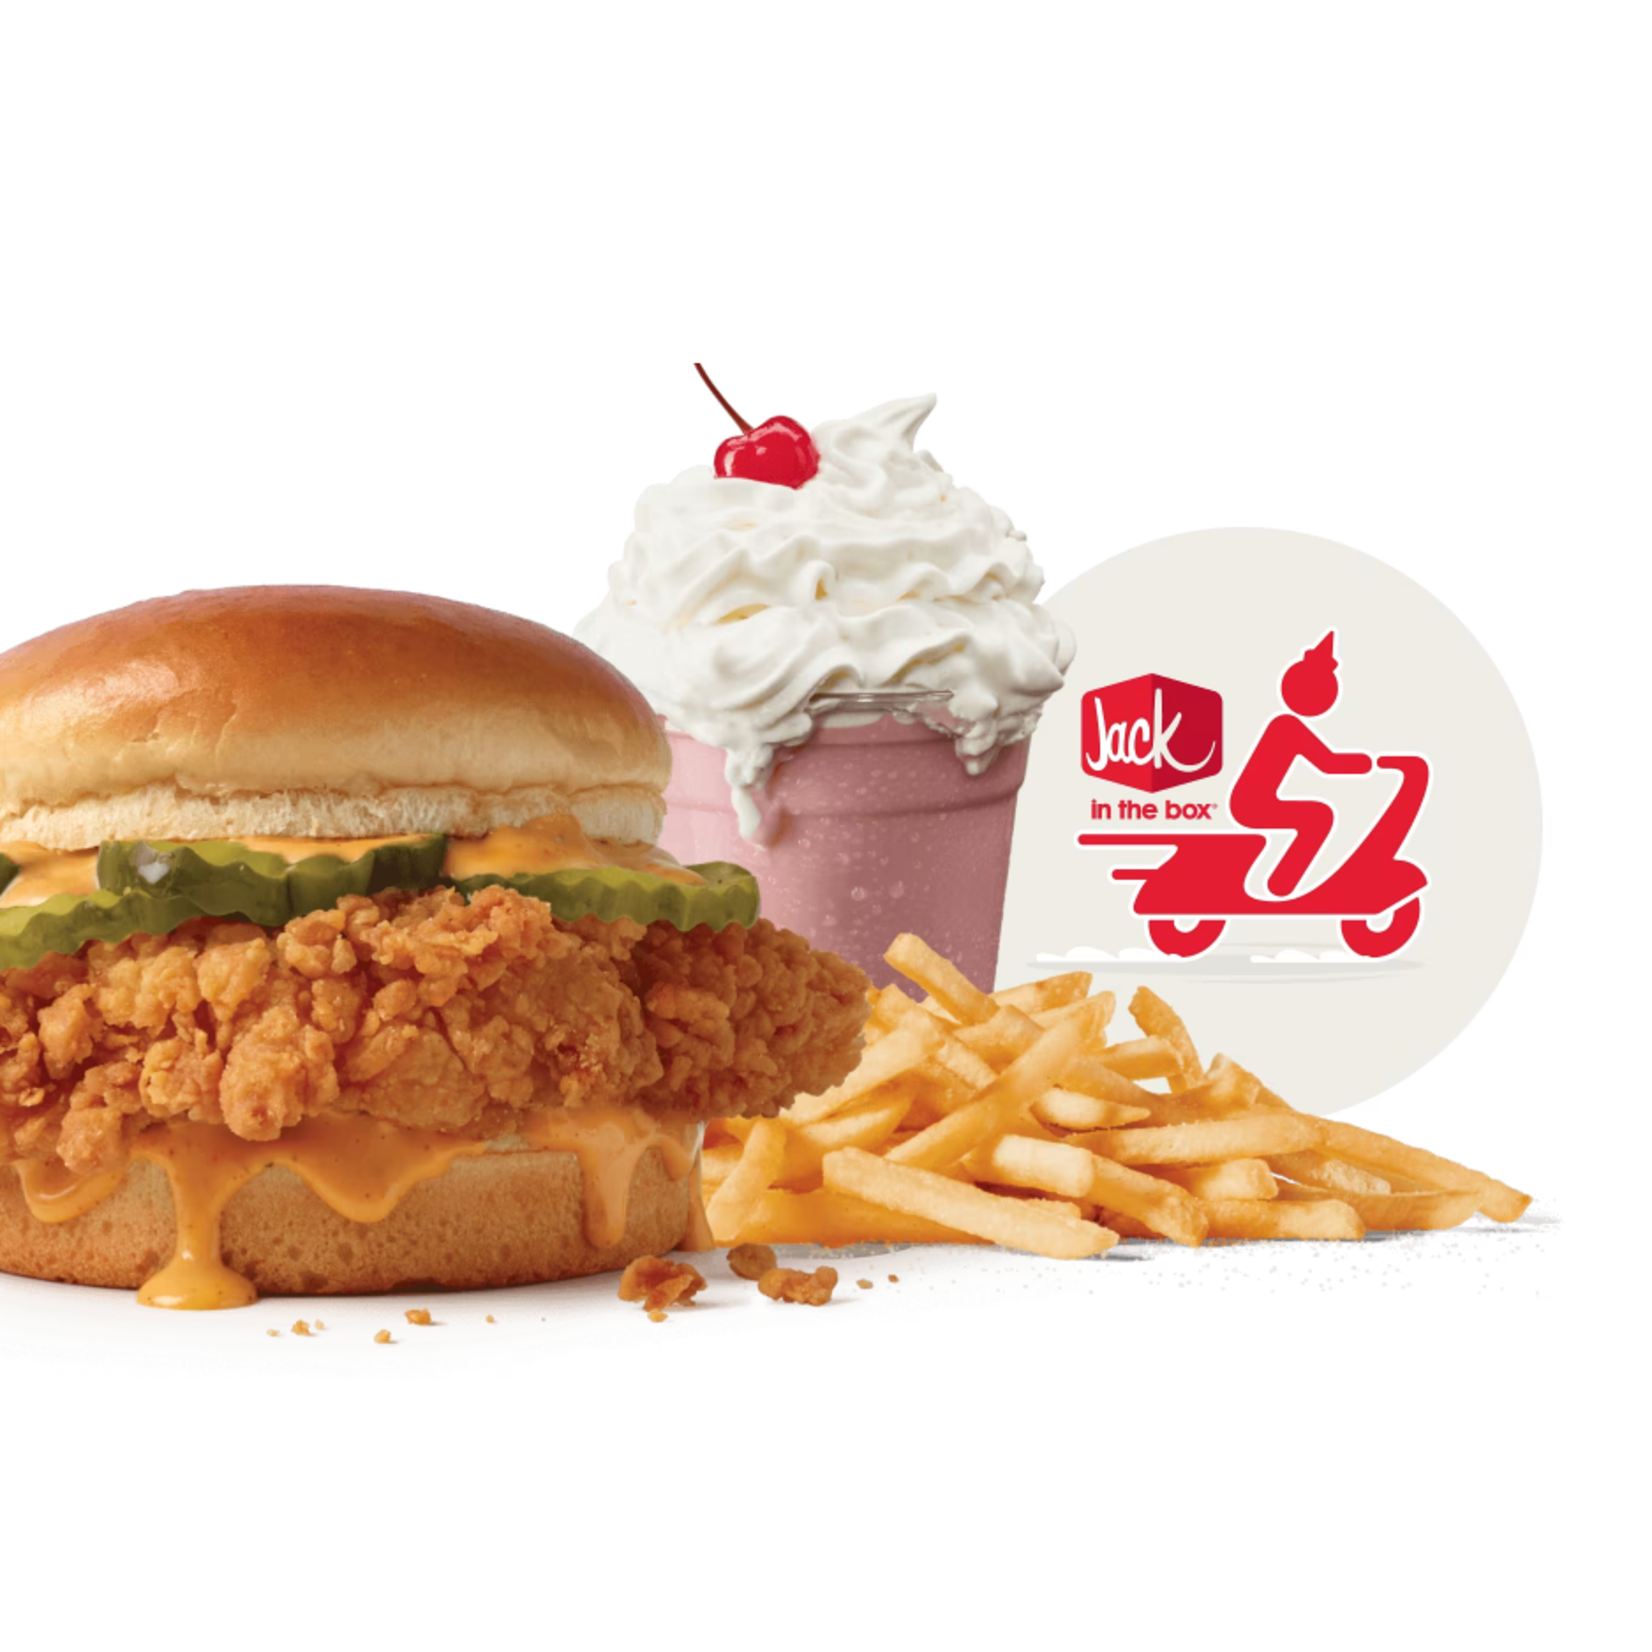 Jack in the Box Jack in the Box - W Craig & Clayton $13 - Sourdough Jack Combo